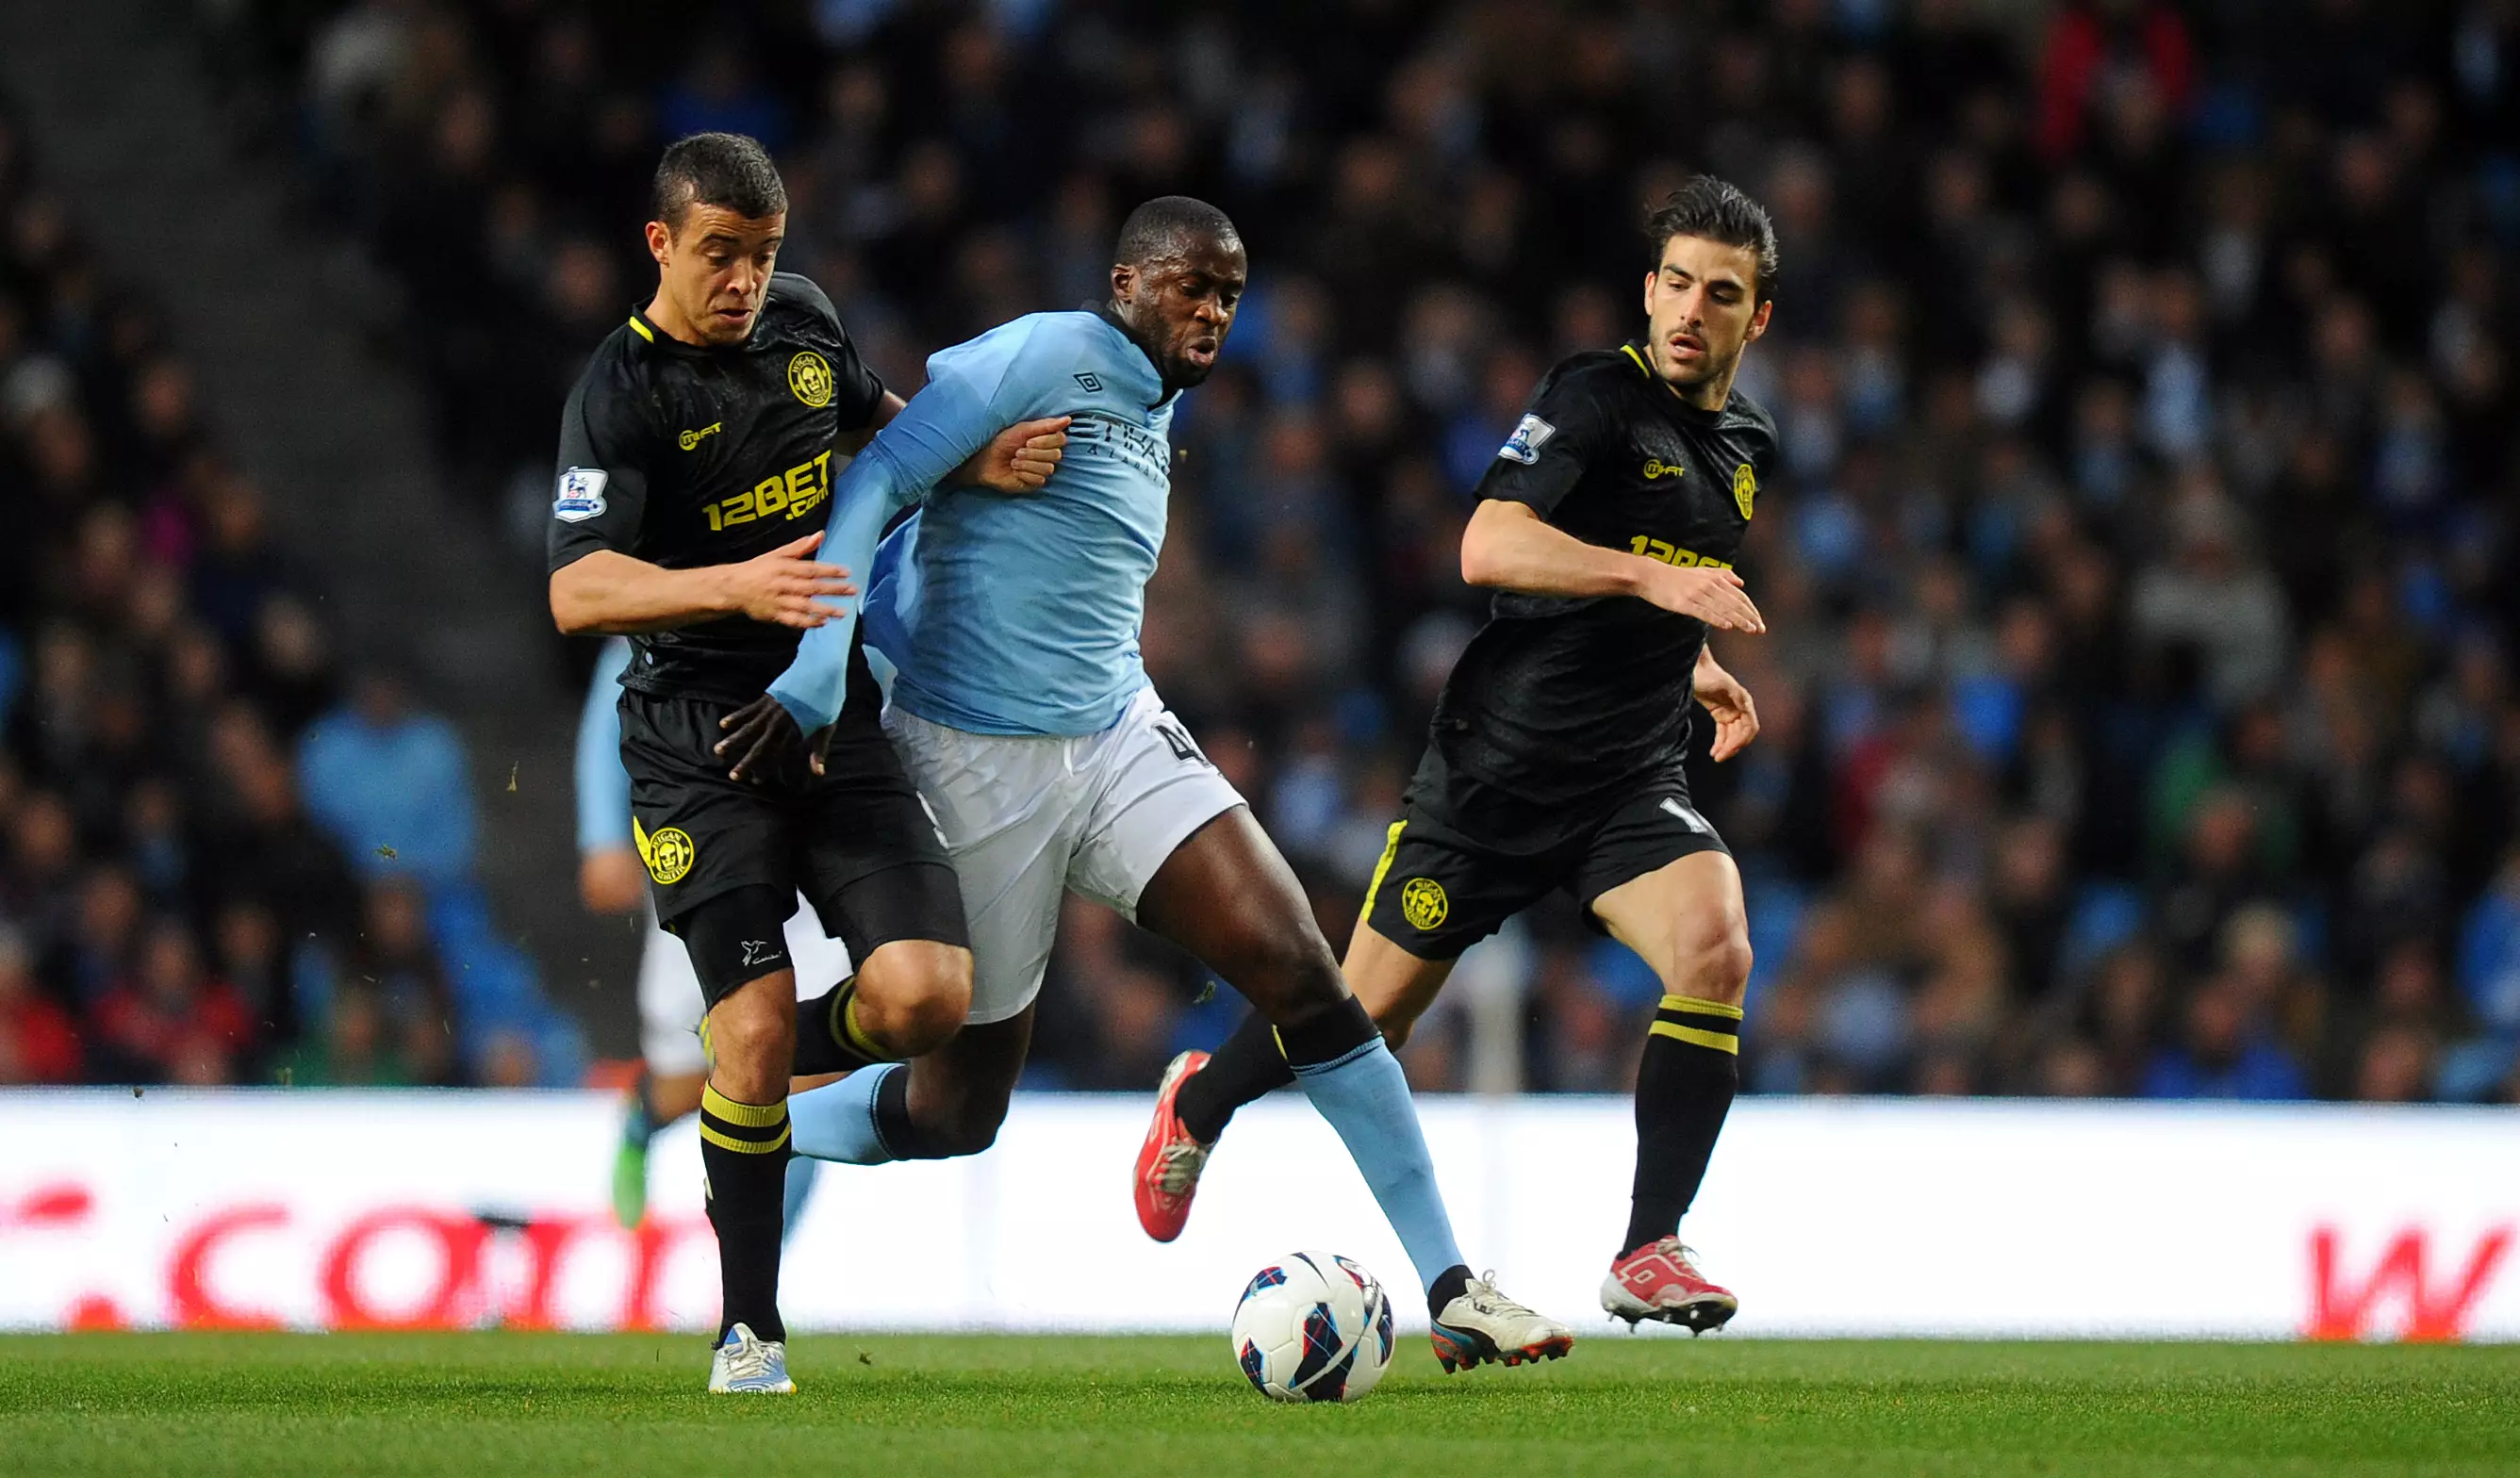 Toure gets his significant bum in the way of an opponent. Image: PA Images